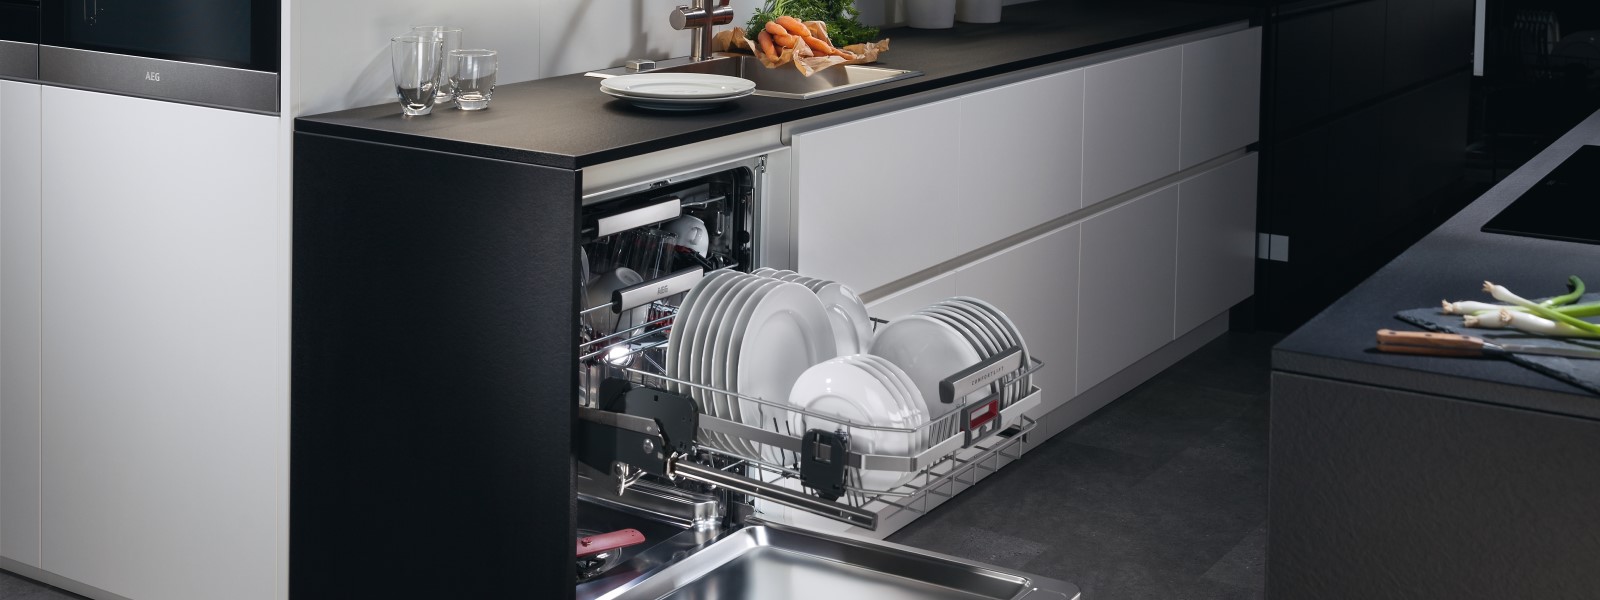 Save Up To $400 On Selected AEG Dishwashers* at Hart & Co